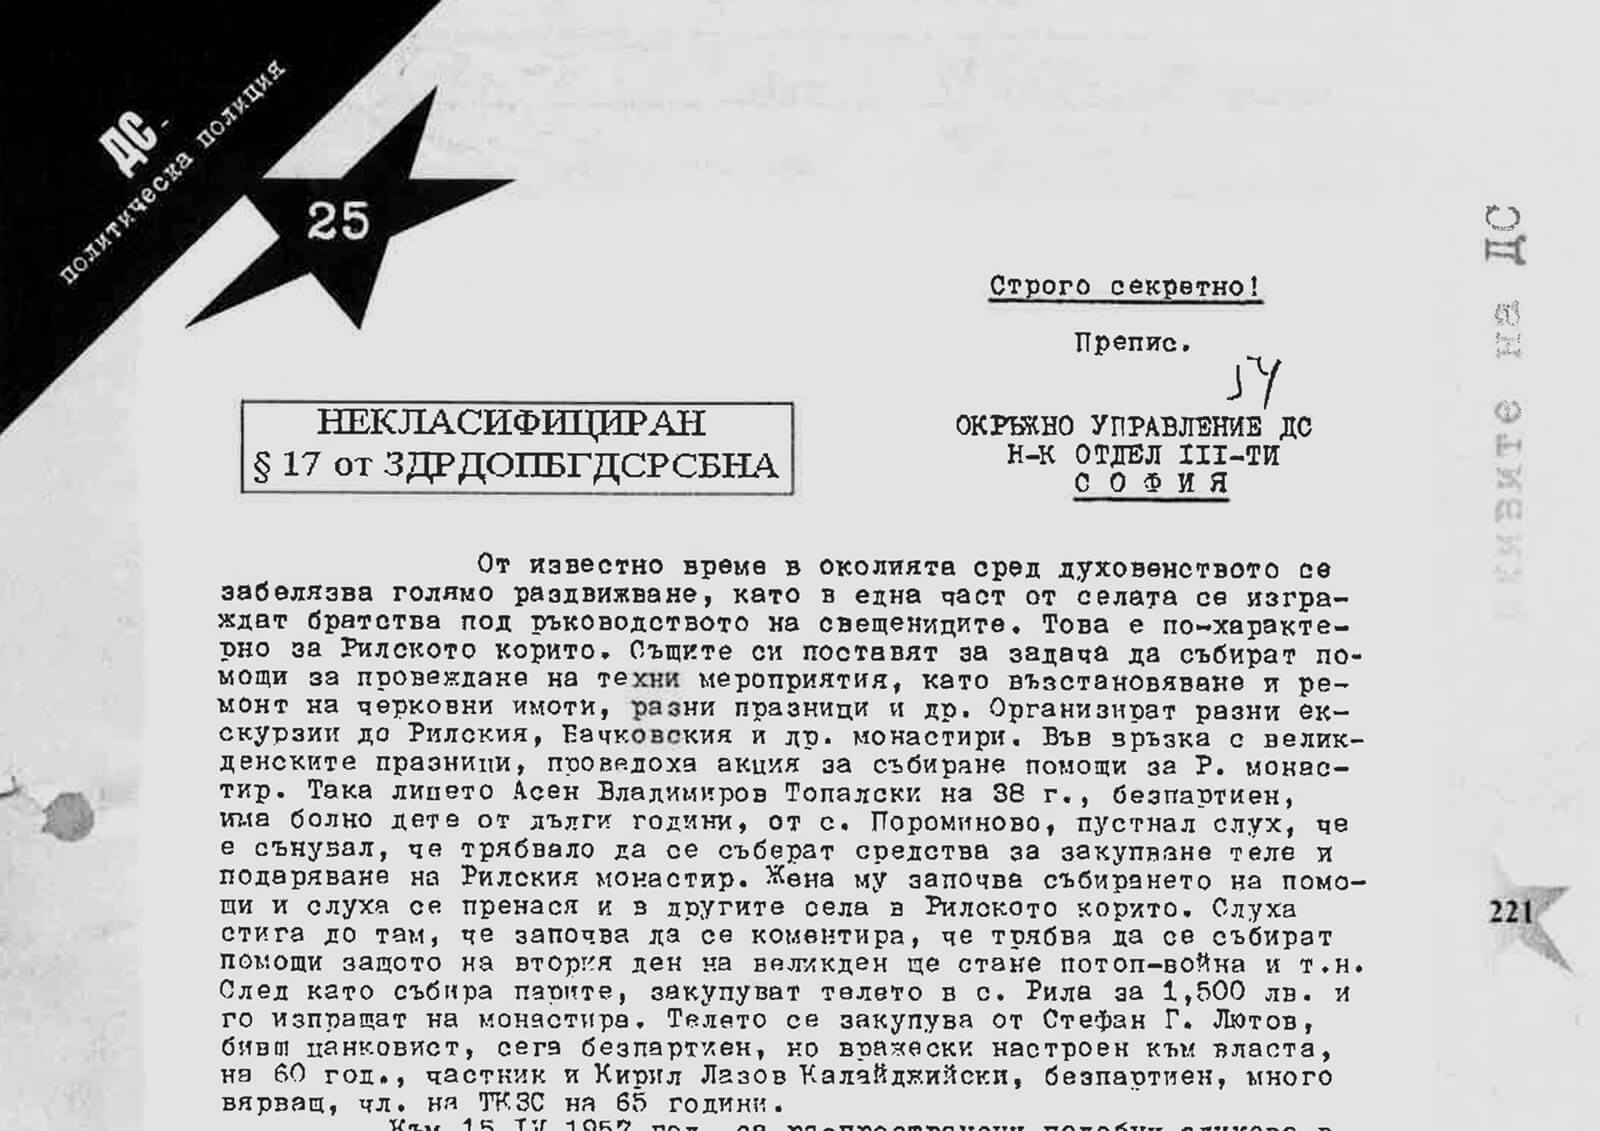 A detail from a nineteen fifty-seven report by the Bulgarian secret police on dream rumors circulating in the area around the St. Ivan of Rila monastery.